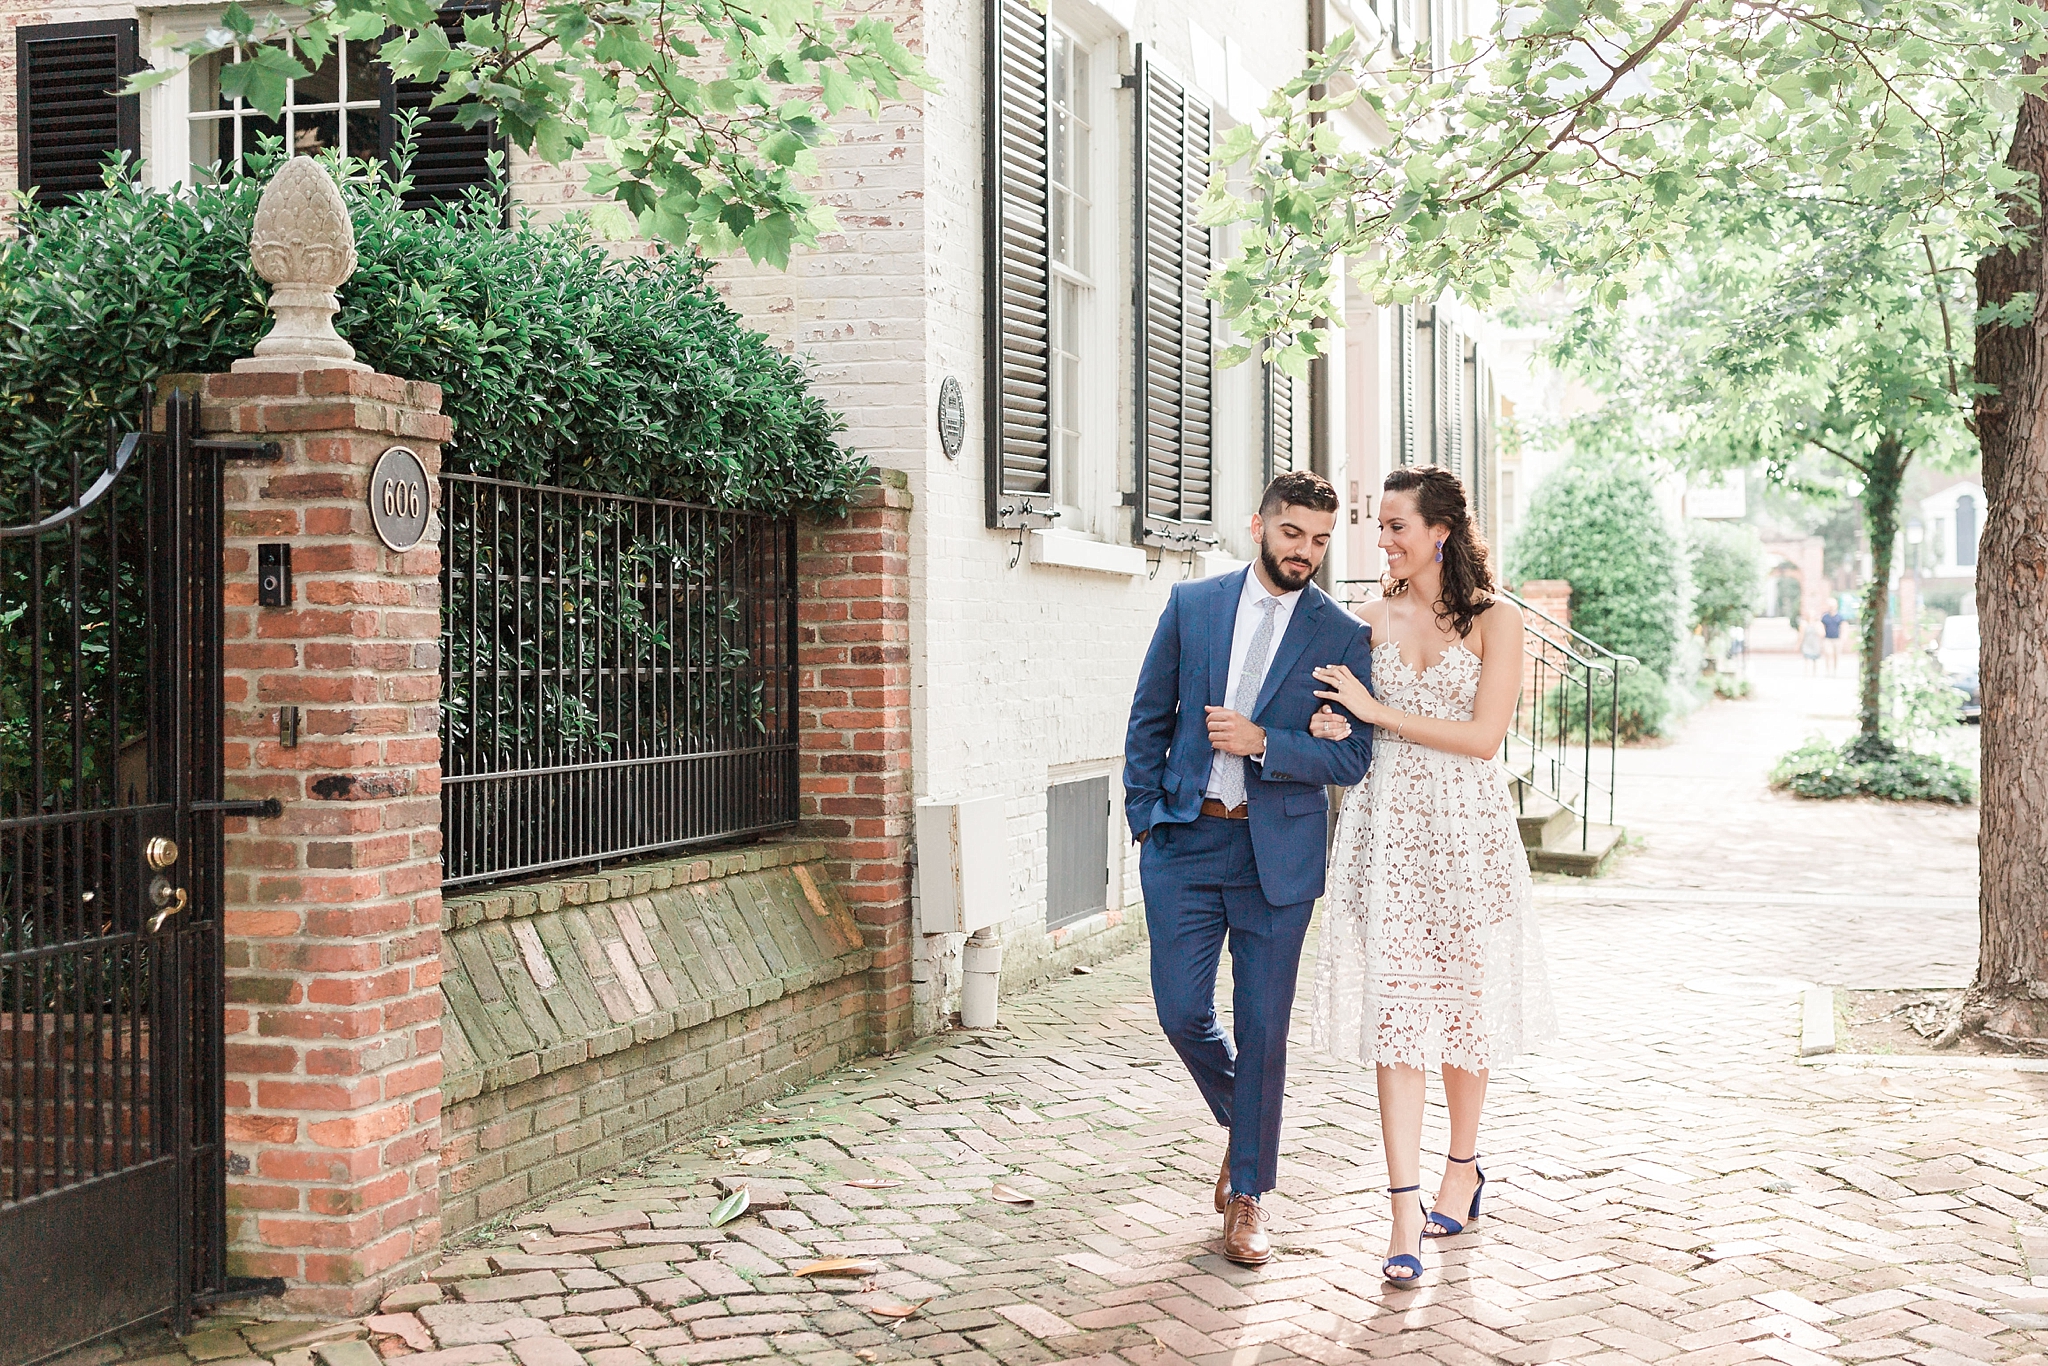 This romantic and intimate Old Town Alexandria elopement was photographed by Washington, DC wedding photographer Alicia Lacey.